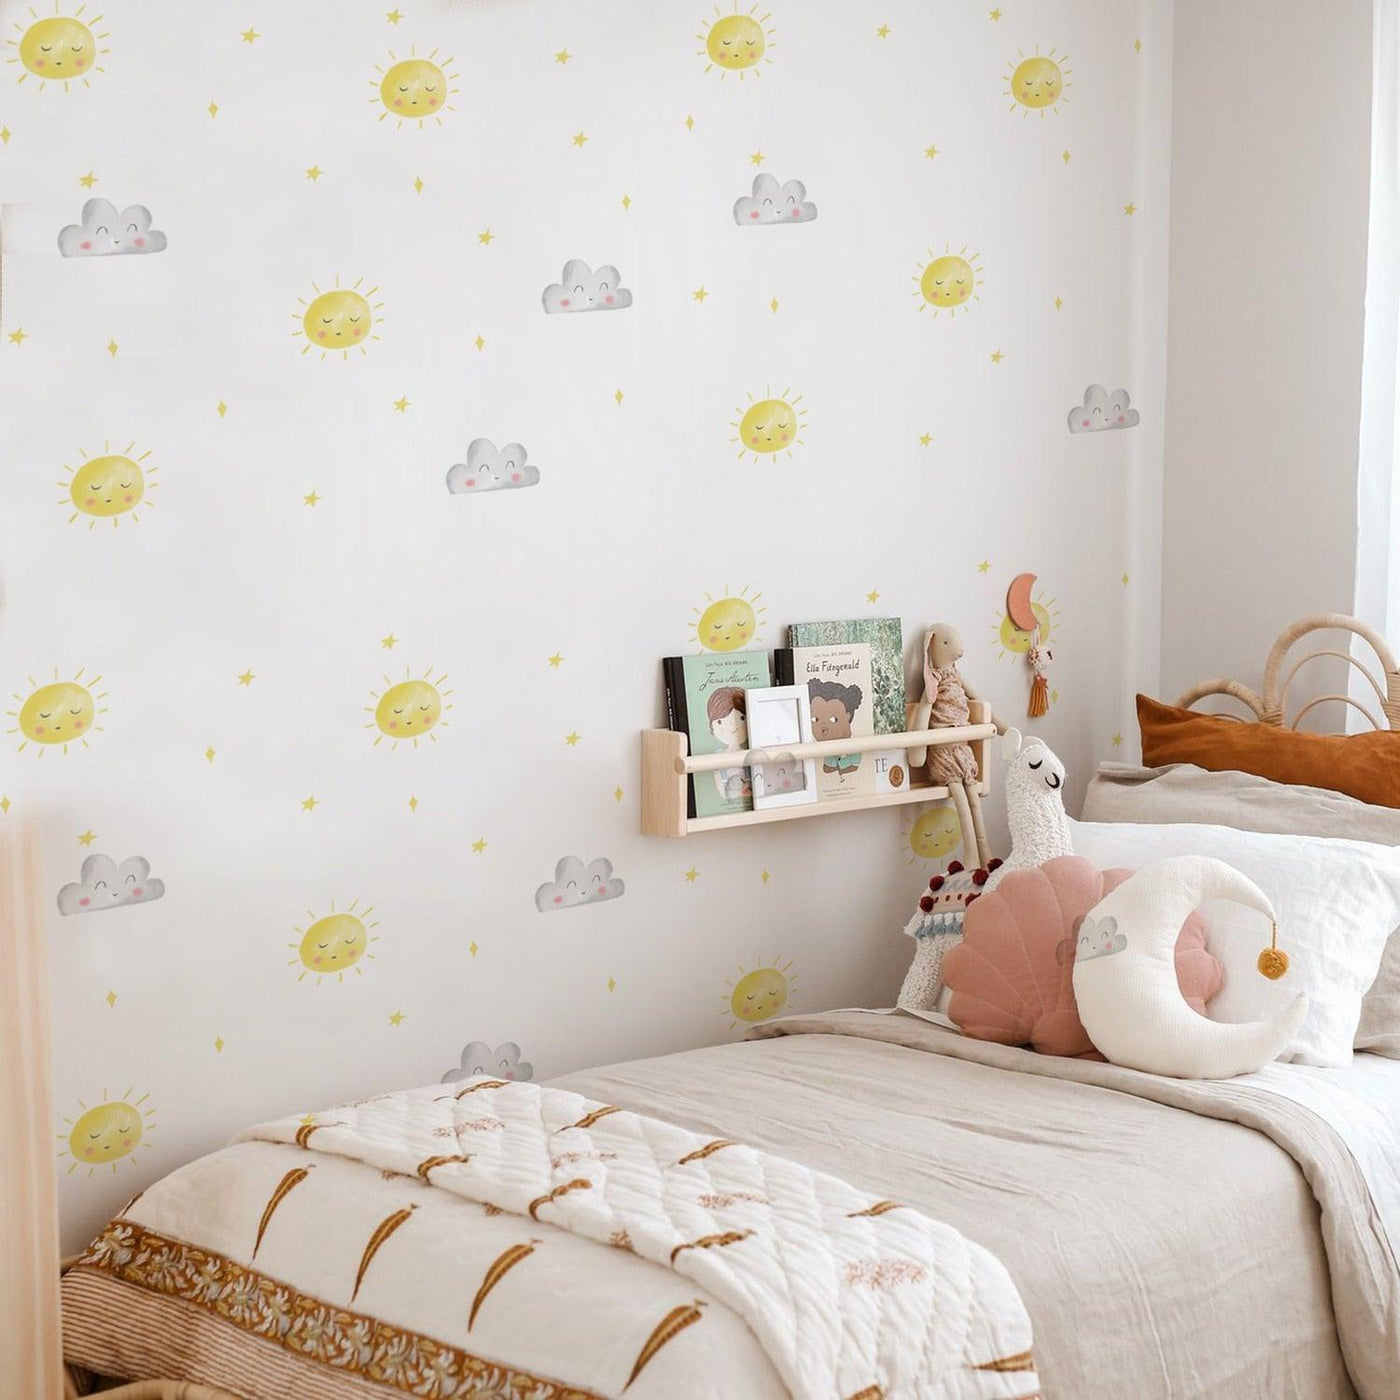 Cartoon Sun & Clouds Wall Decal Stickers - Parker and Olive